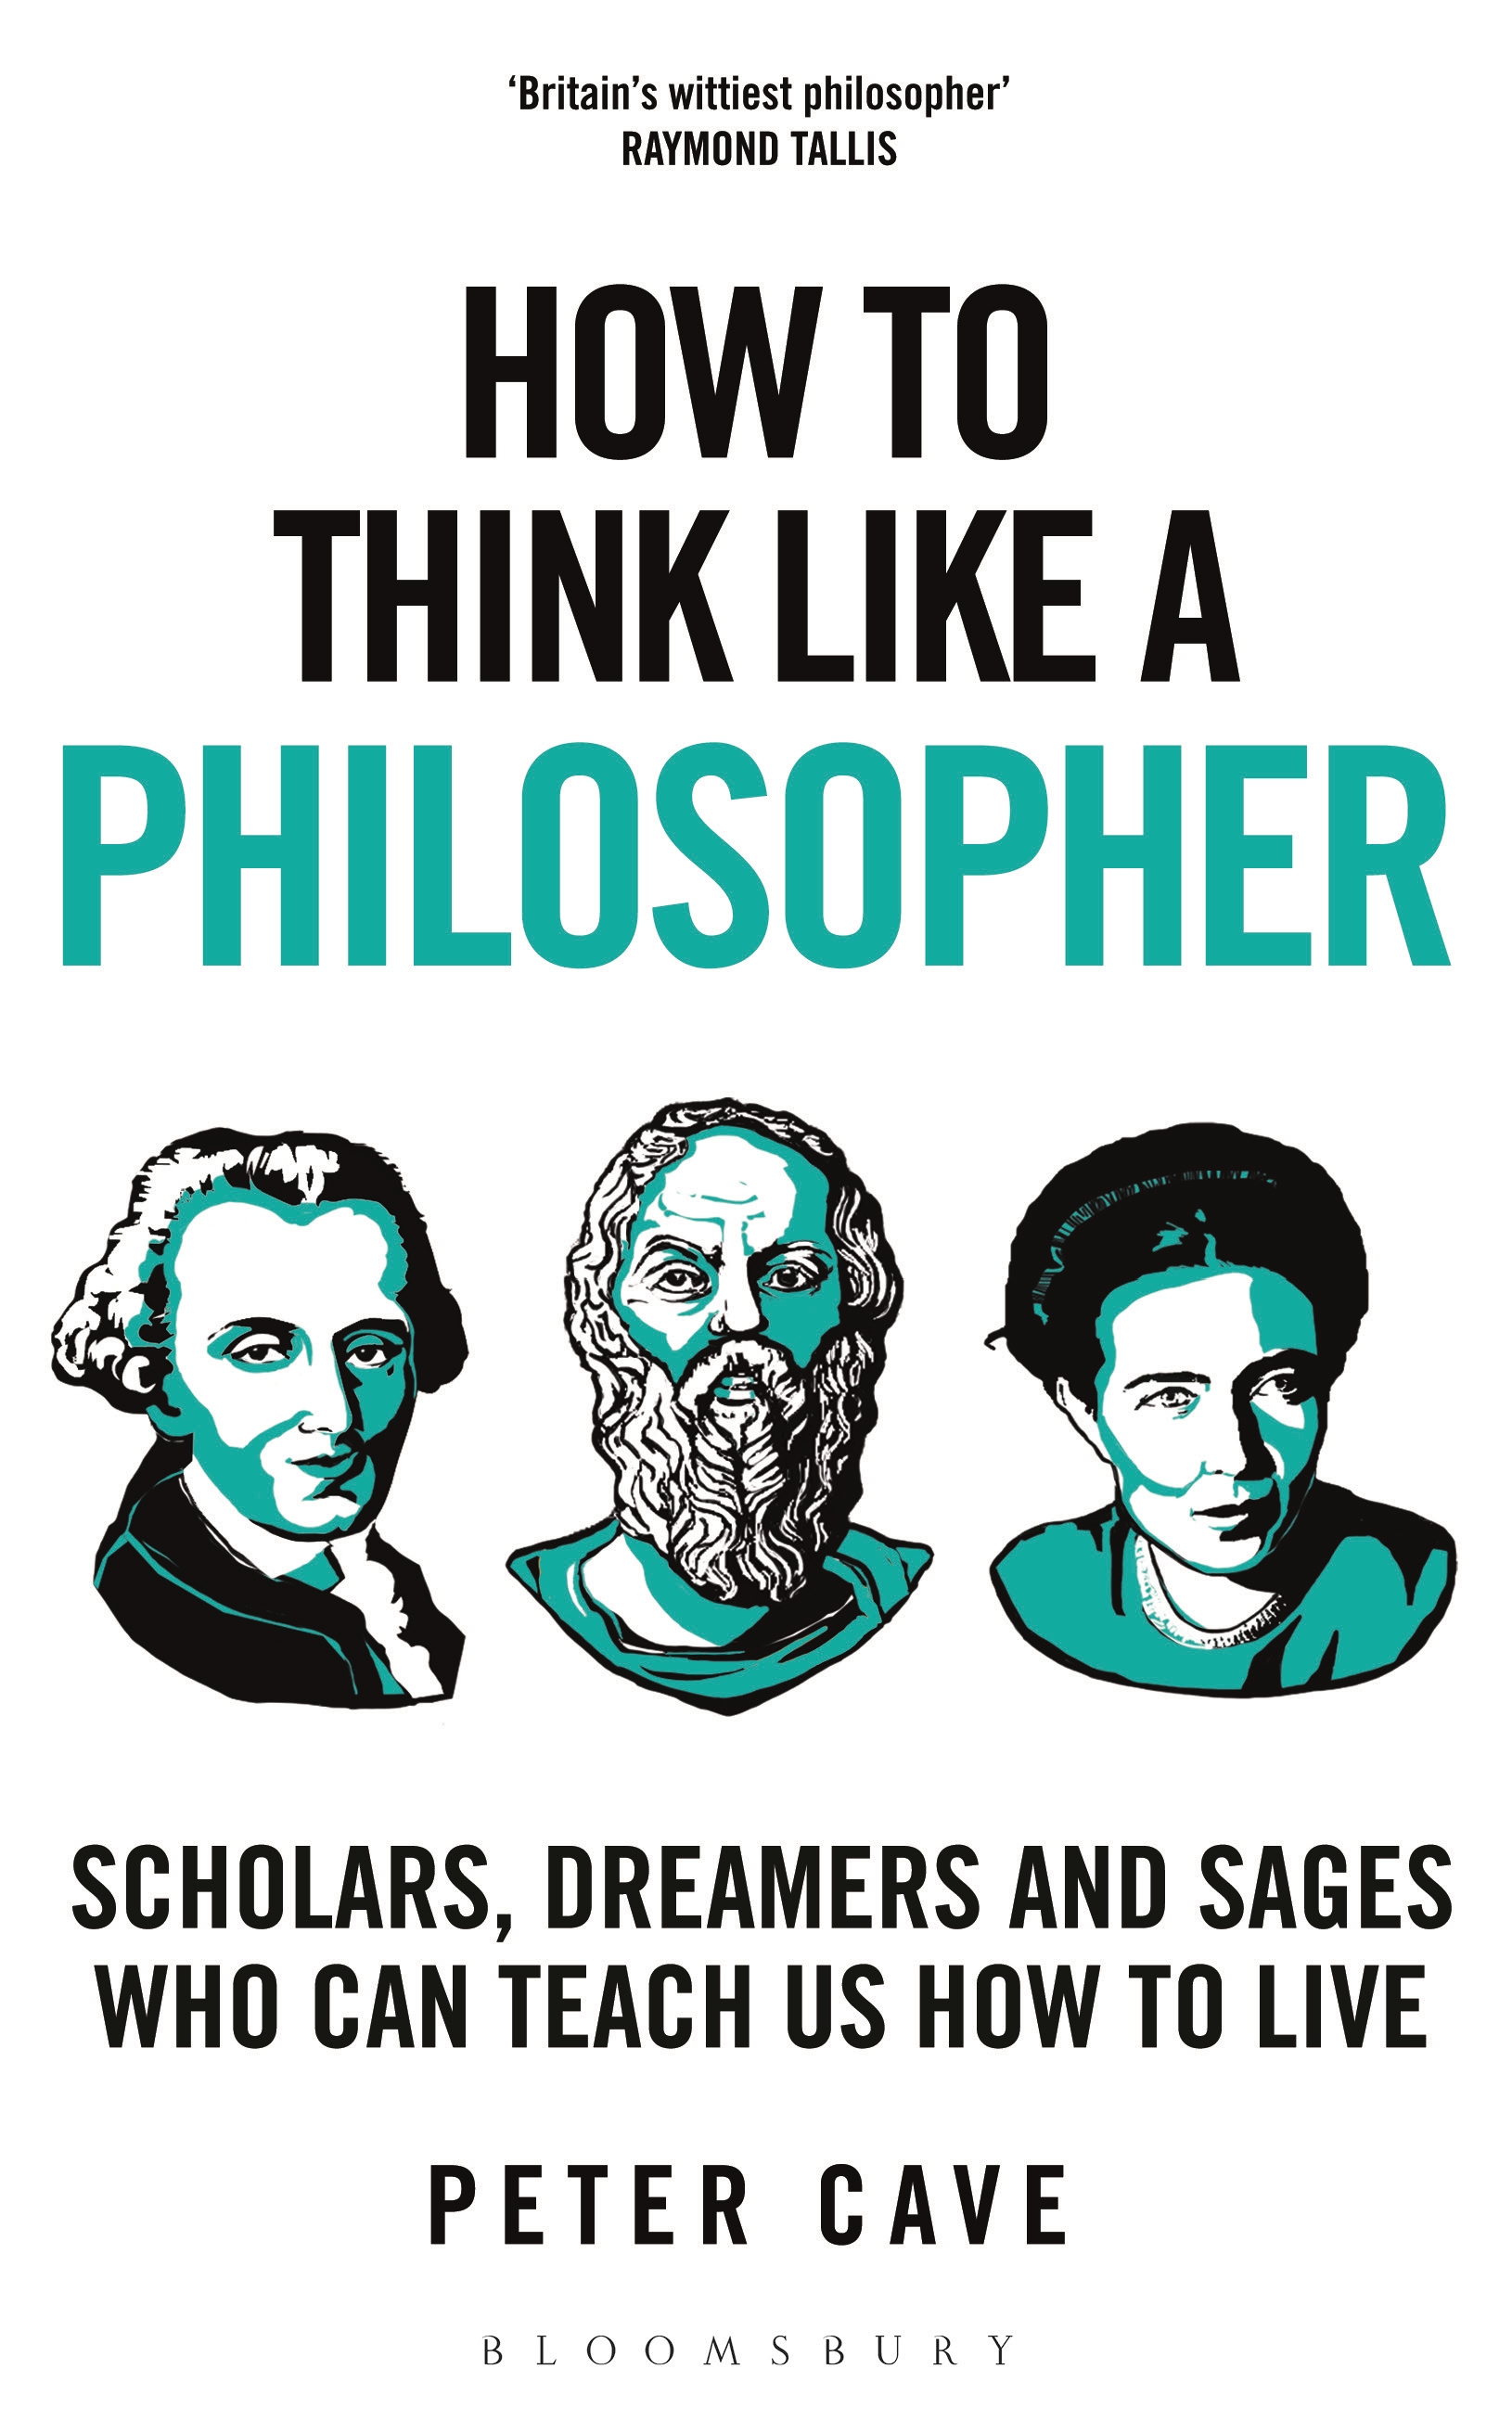 How to Think Like a Philosopher